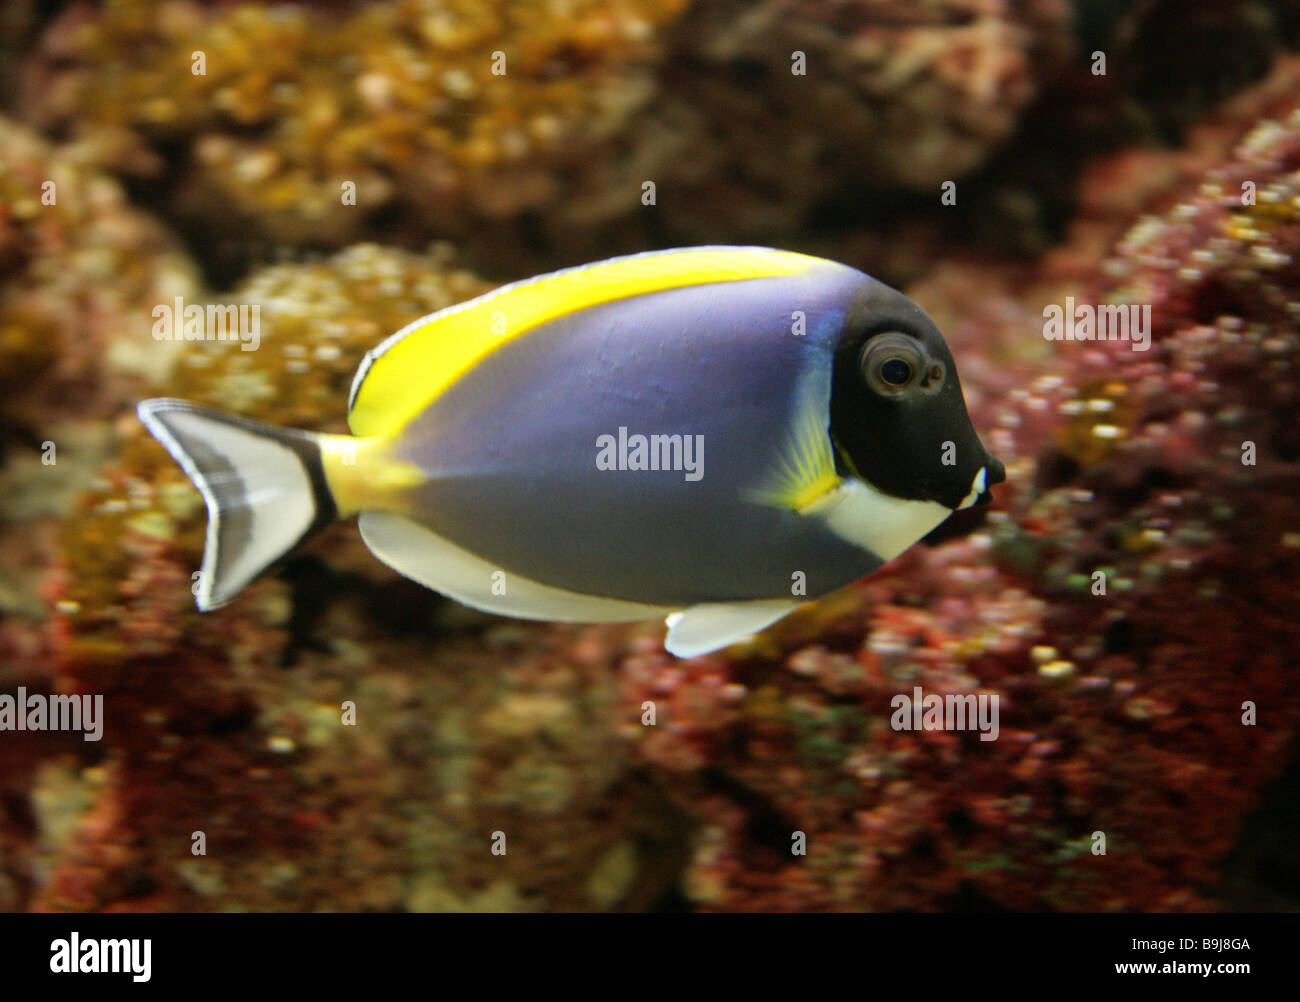 Powderblue or Blue Tang Fish, Acanthurus leucosternon, Acanthuridae. Also known as the Powderblue Surgeonfish. Stock Photo